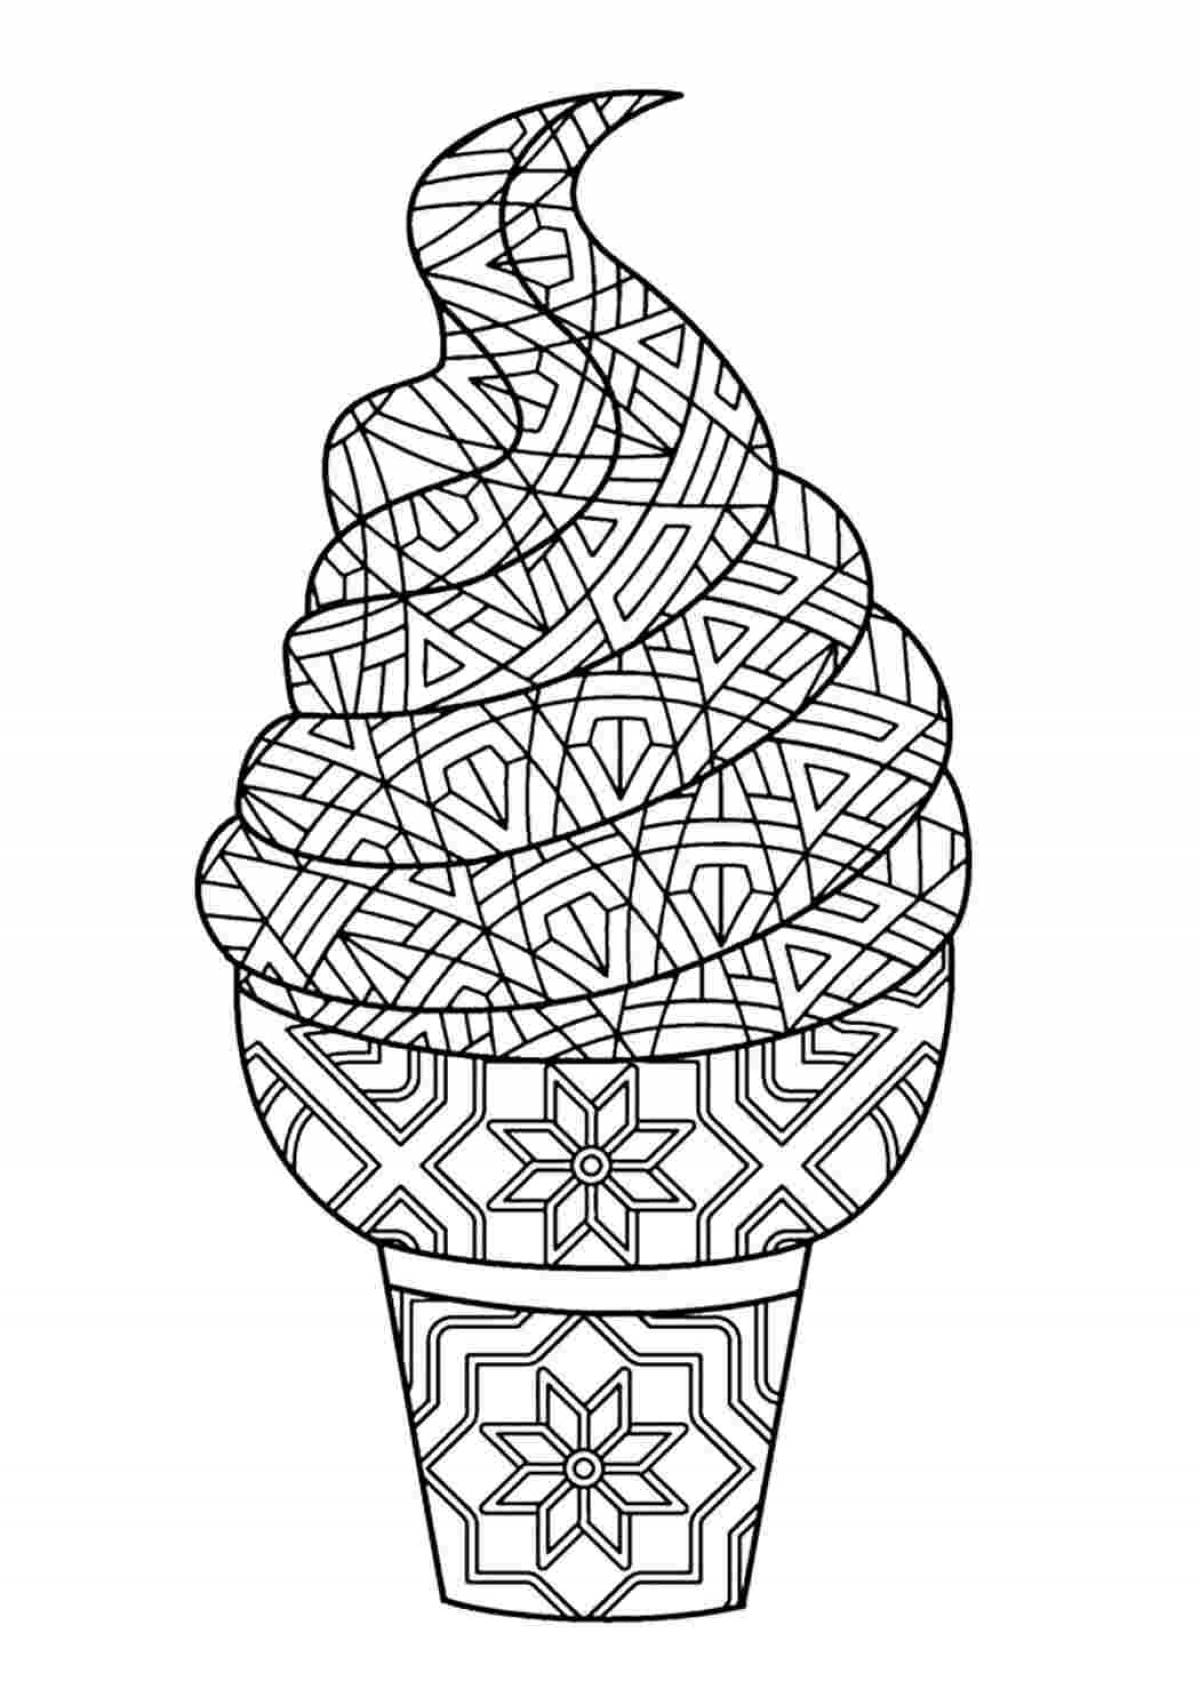 Soothing anti-stress ice cream coloring book